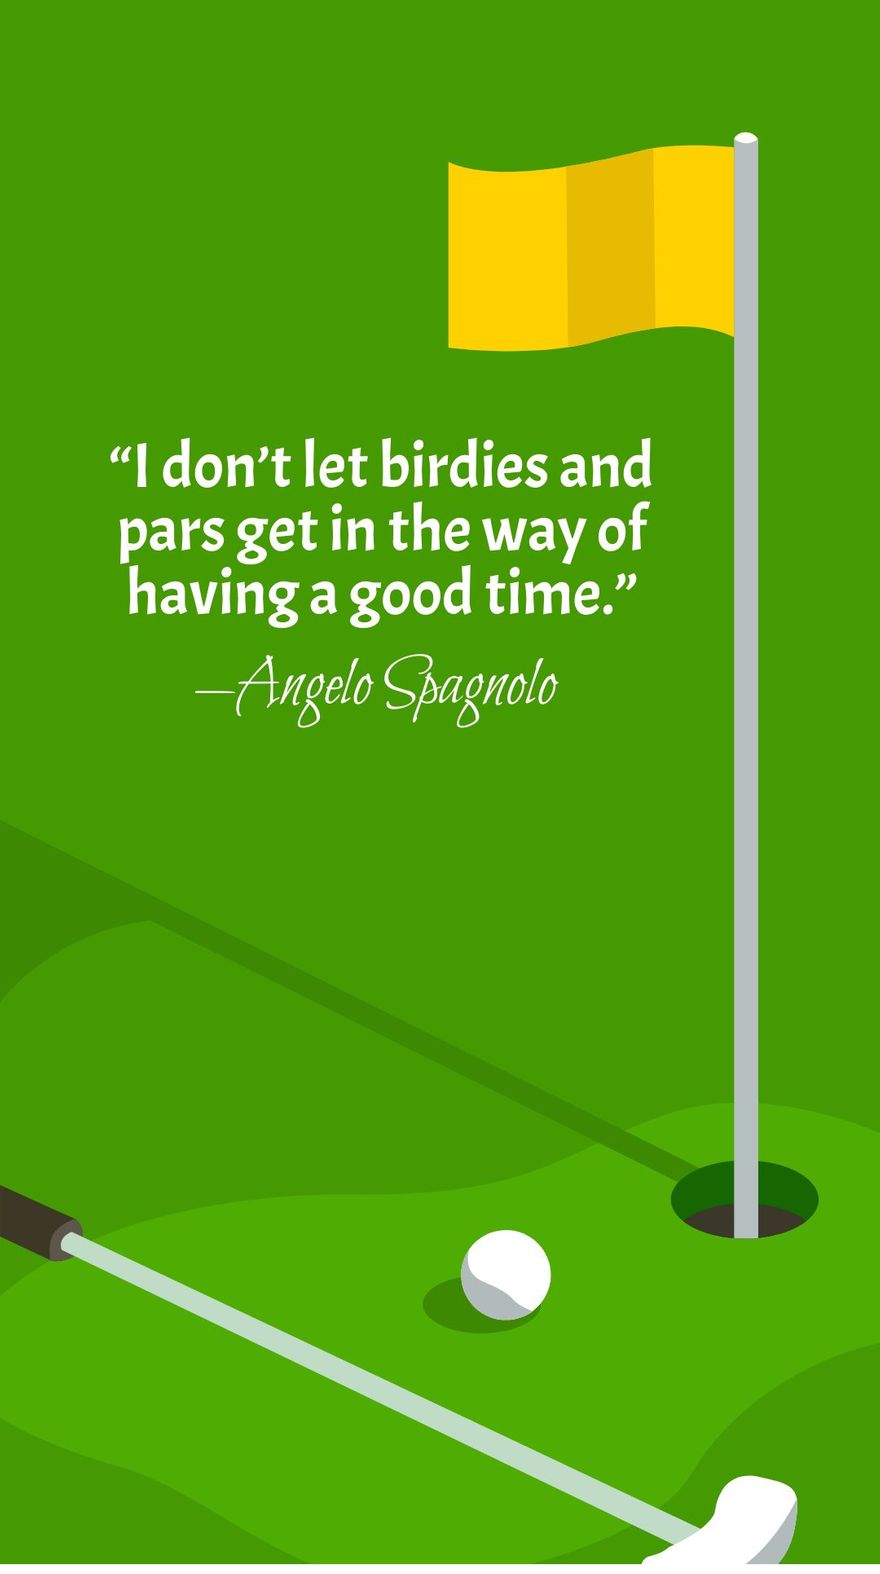 Free Angelo Spagnolo - I don’t let birdies and pars get in the way of having a good time. in JPG